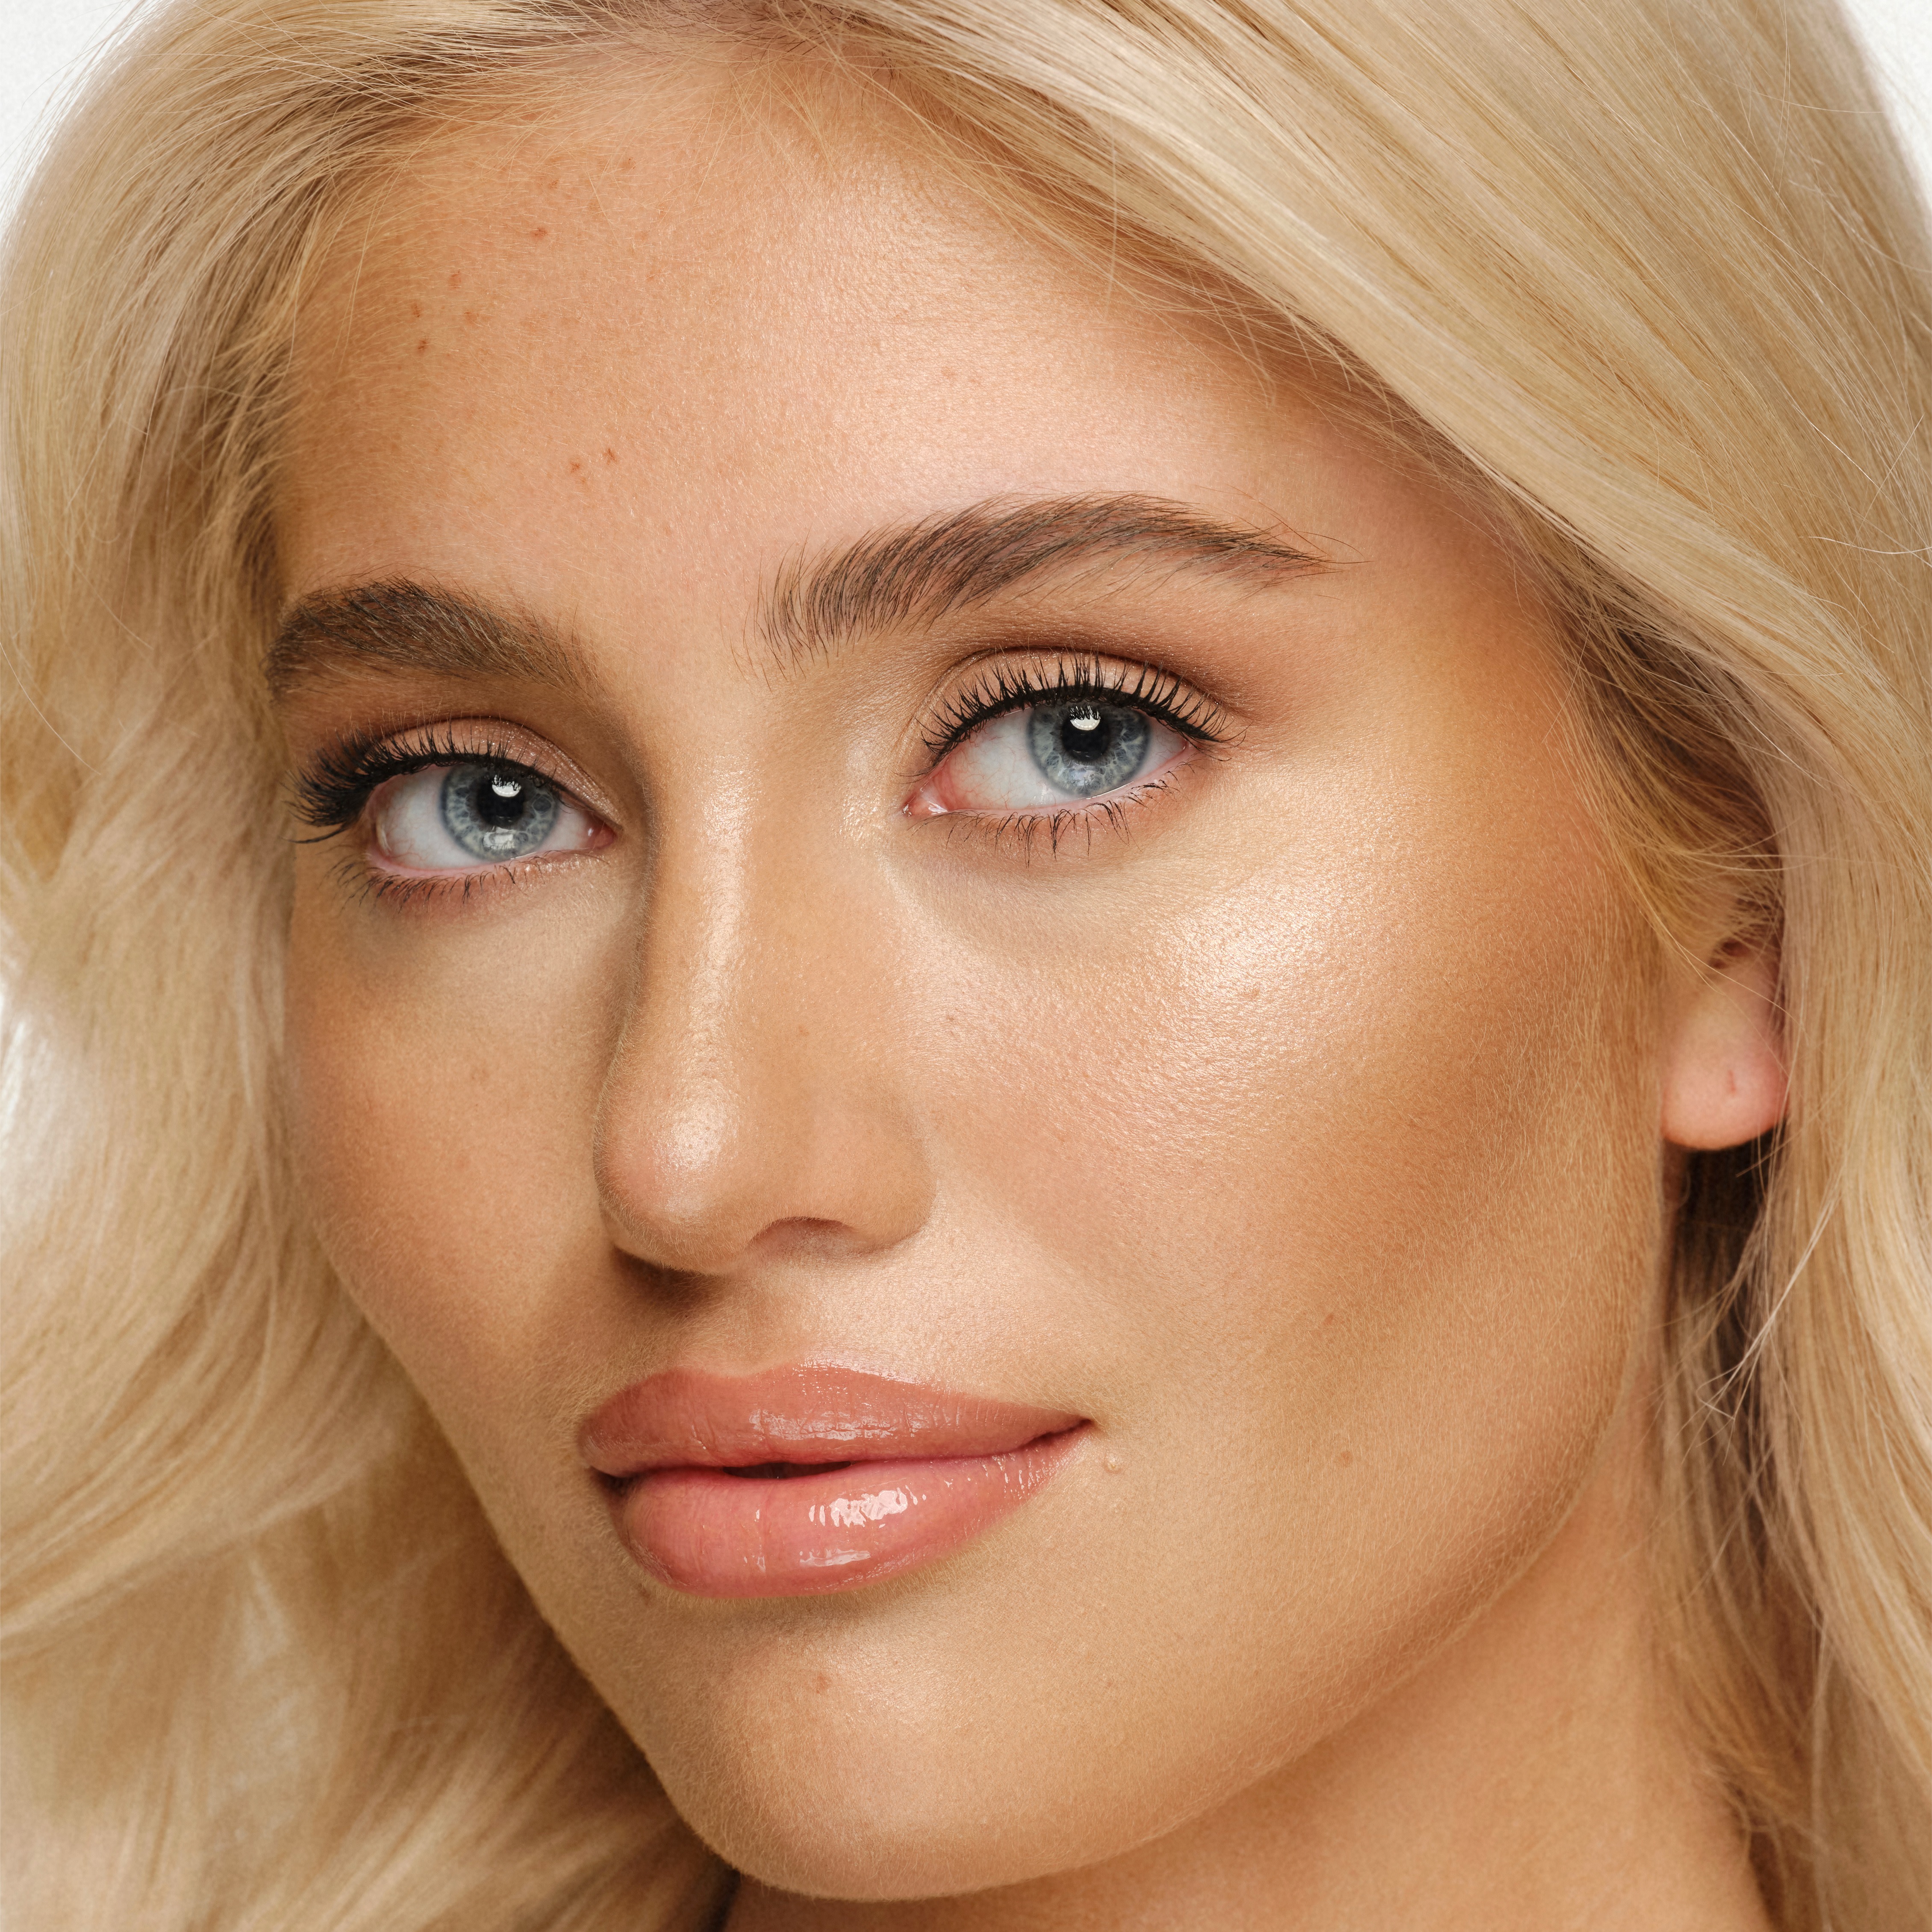 Model with a tantouring effect 4 days after applying Charlotte's Beautiful Skin Island Glow Easy Tanning Drops